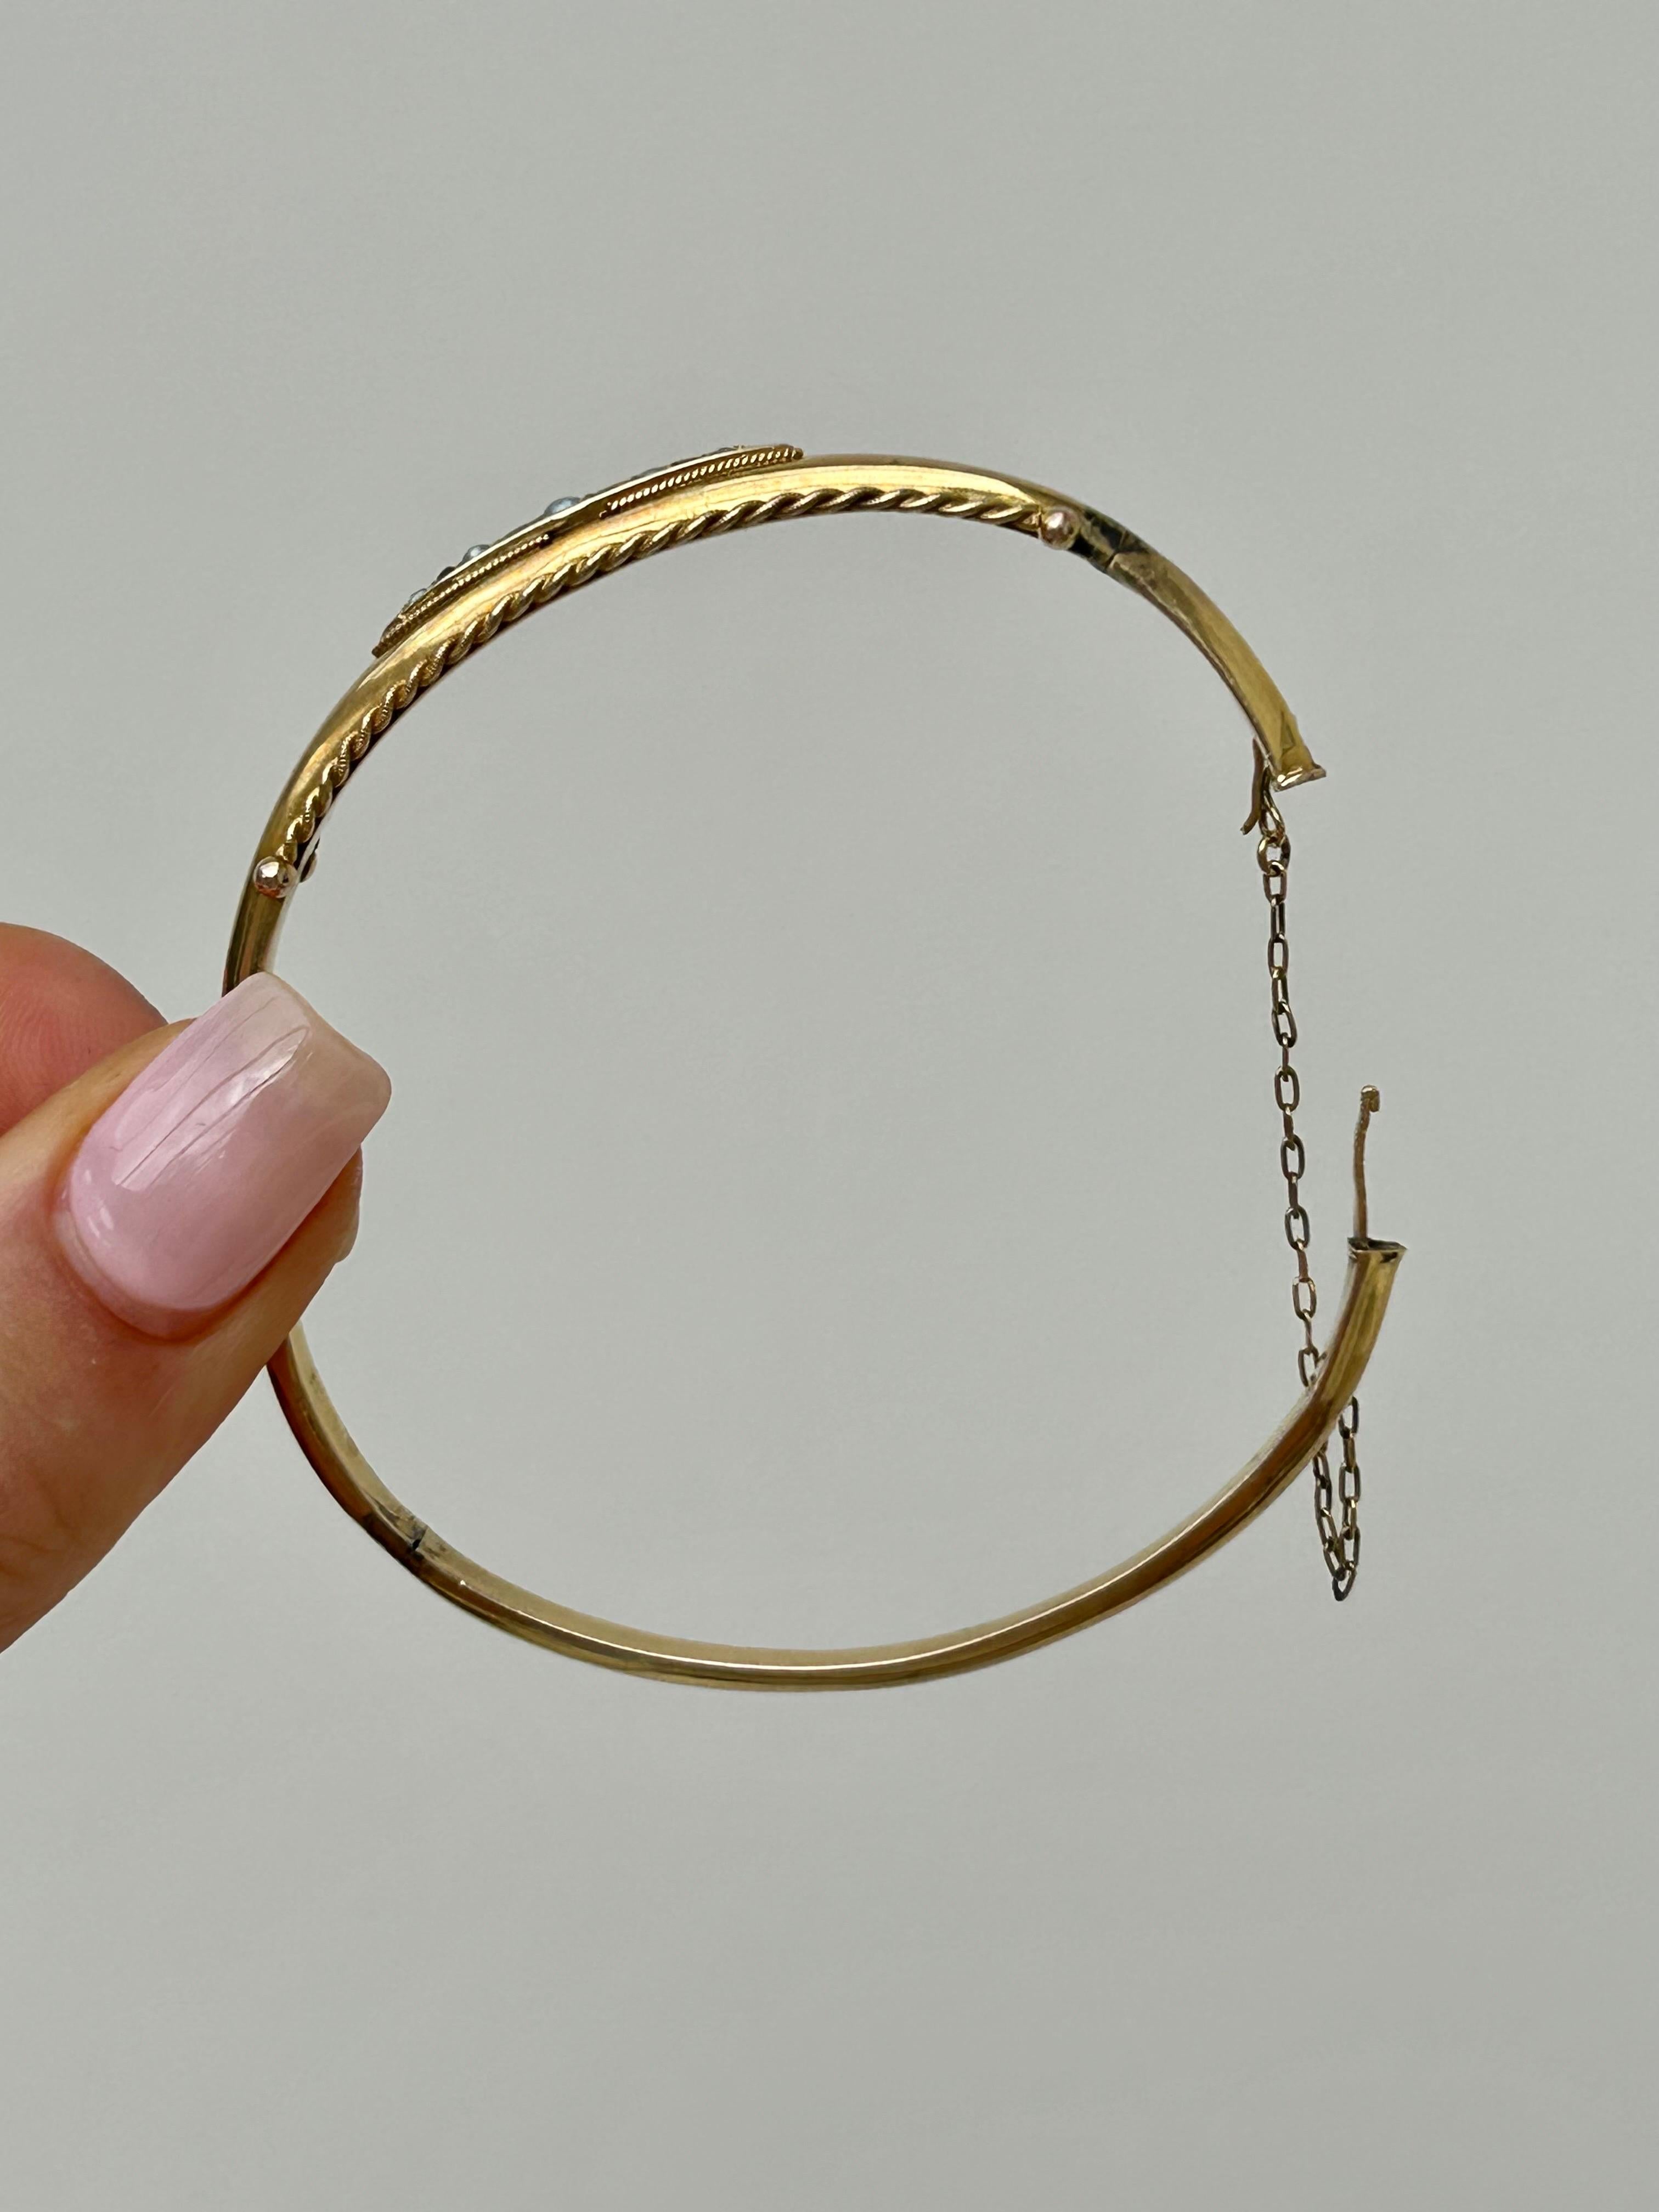 Antique C.1898 Sapphire and Pearl Bangle Bracelet in 9 Carat Yellow Gold In Good Condition For Sale In Chipping Campden, GB